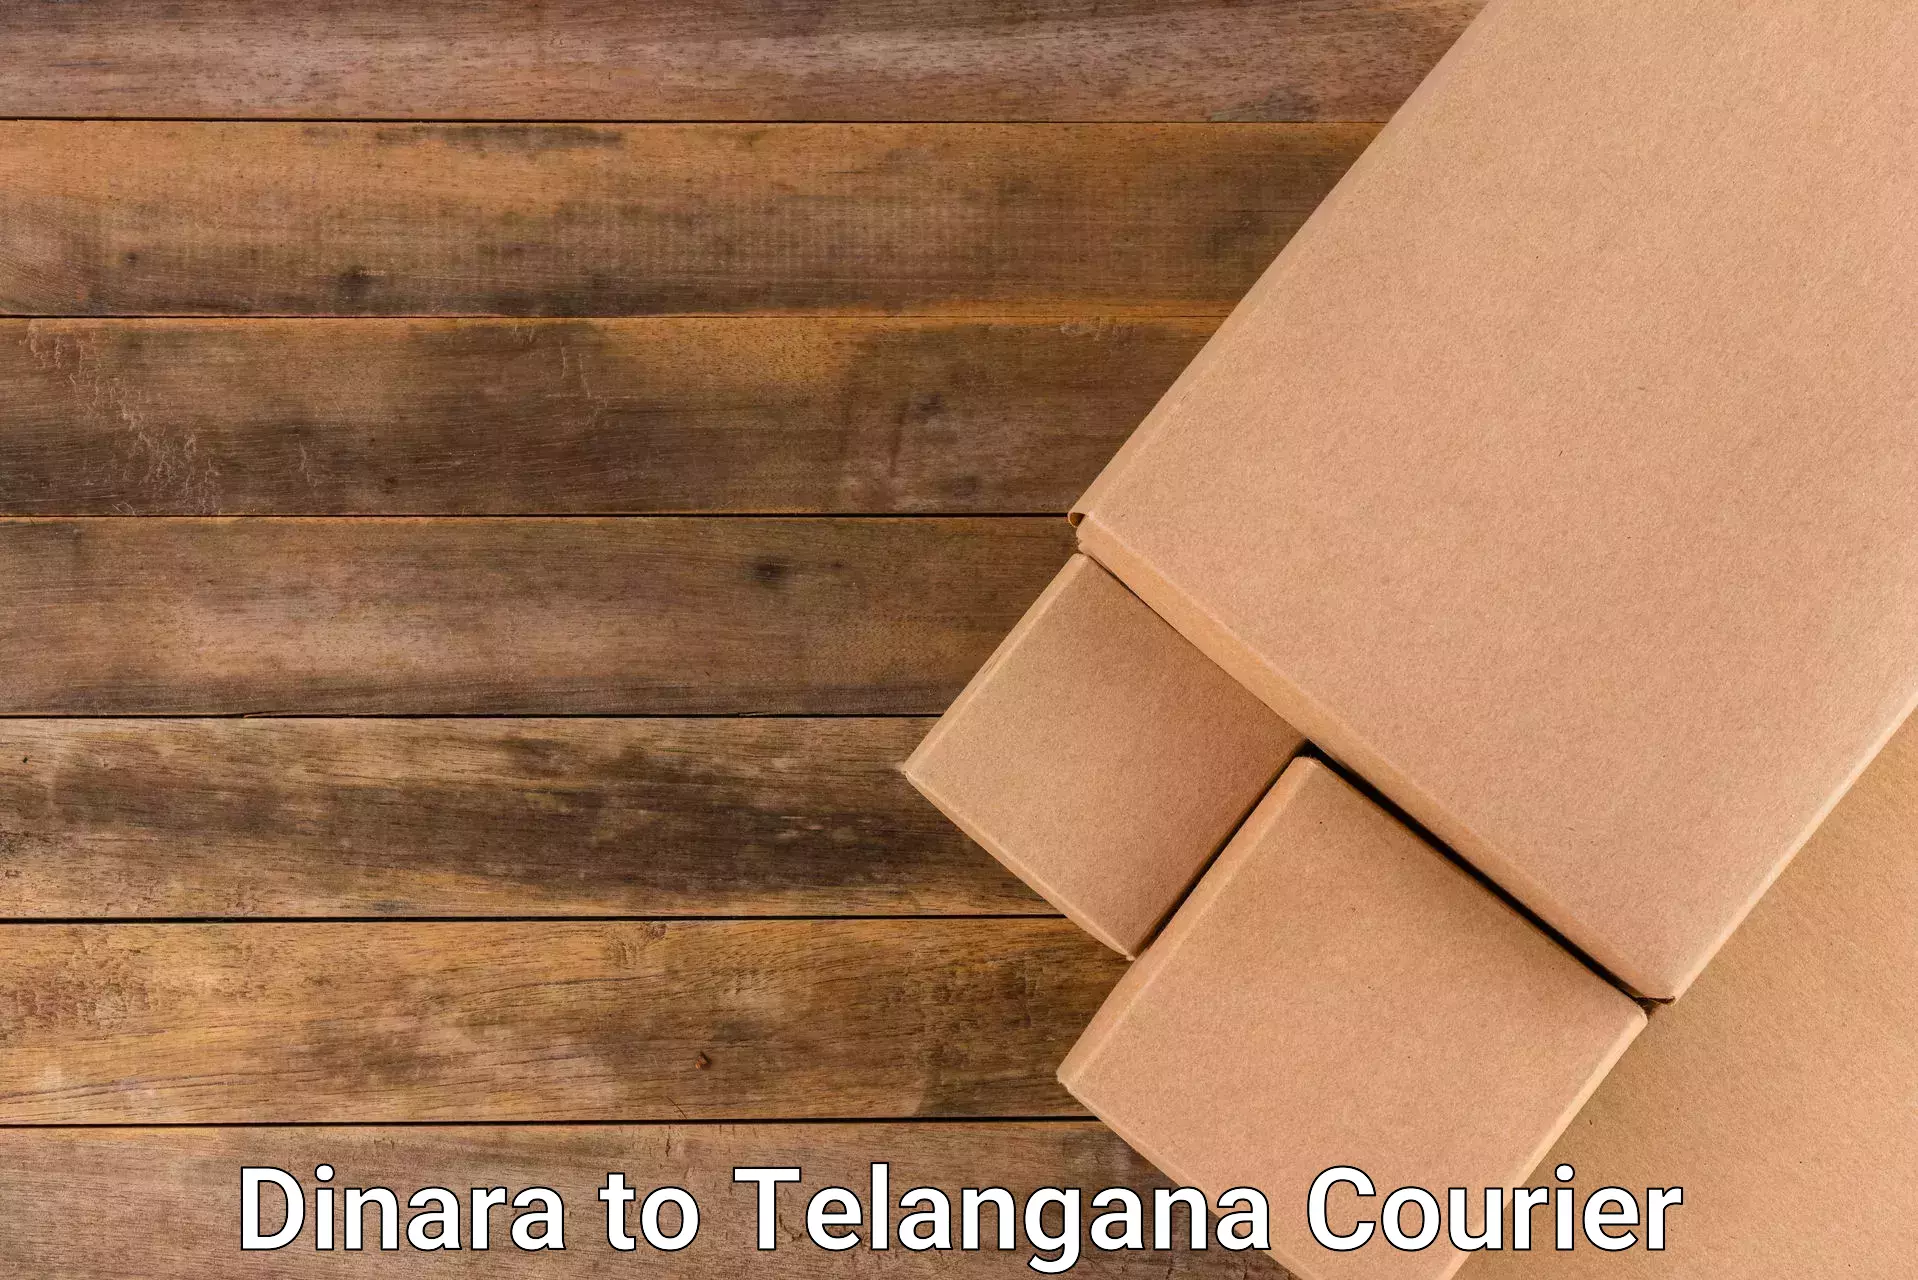 High value parcel delivery in Dinara to Telangana